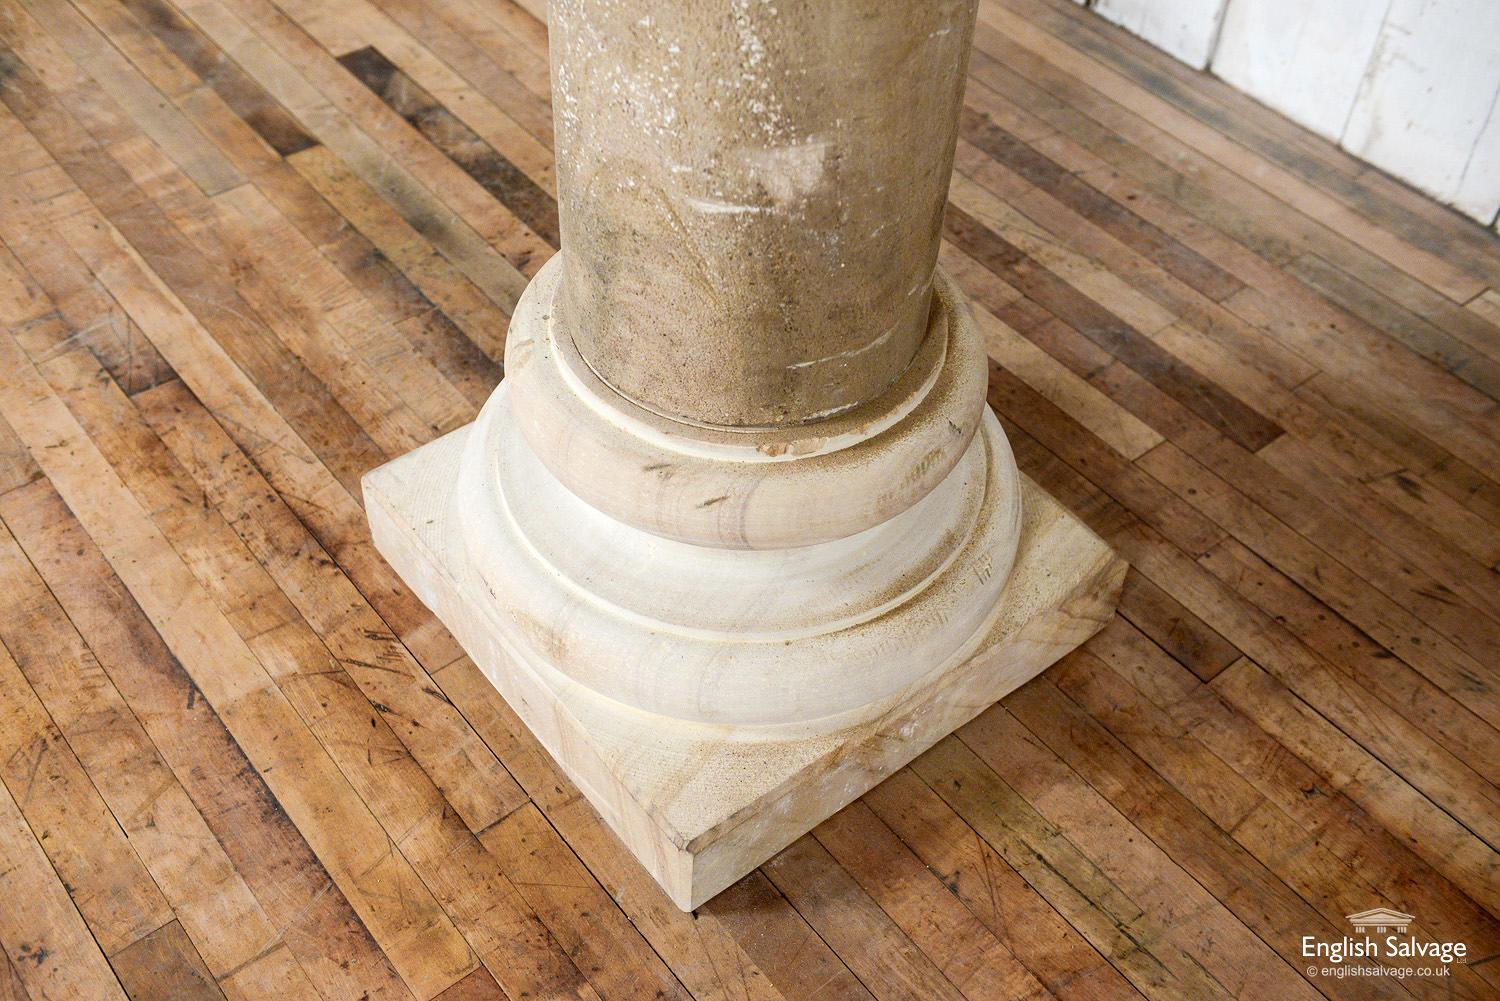 Impressive pair of sandstone pillars in three parts consisting of bases, columns and capitols. The stone has beautiful natural markings and variations, and the columns are slightly darker than the bases and capitols. Overall dimensions are given